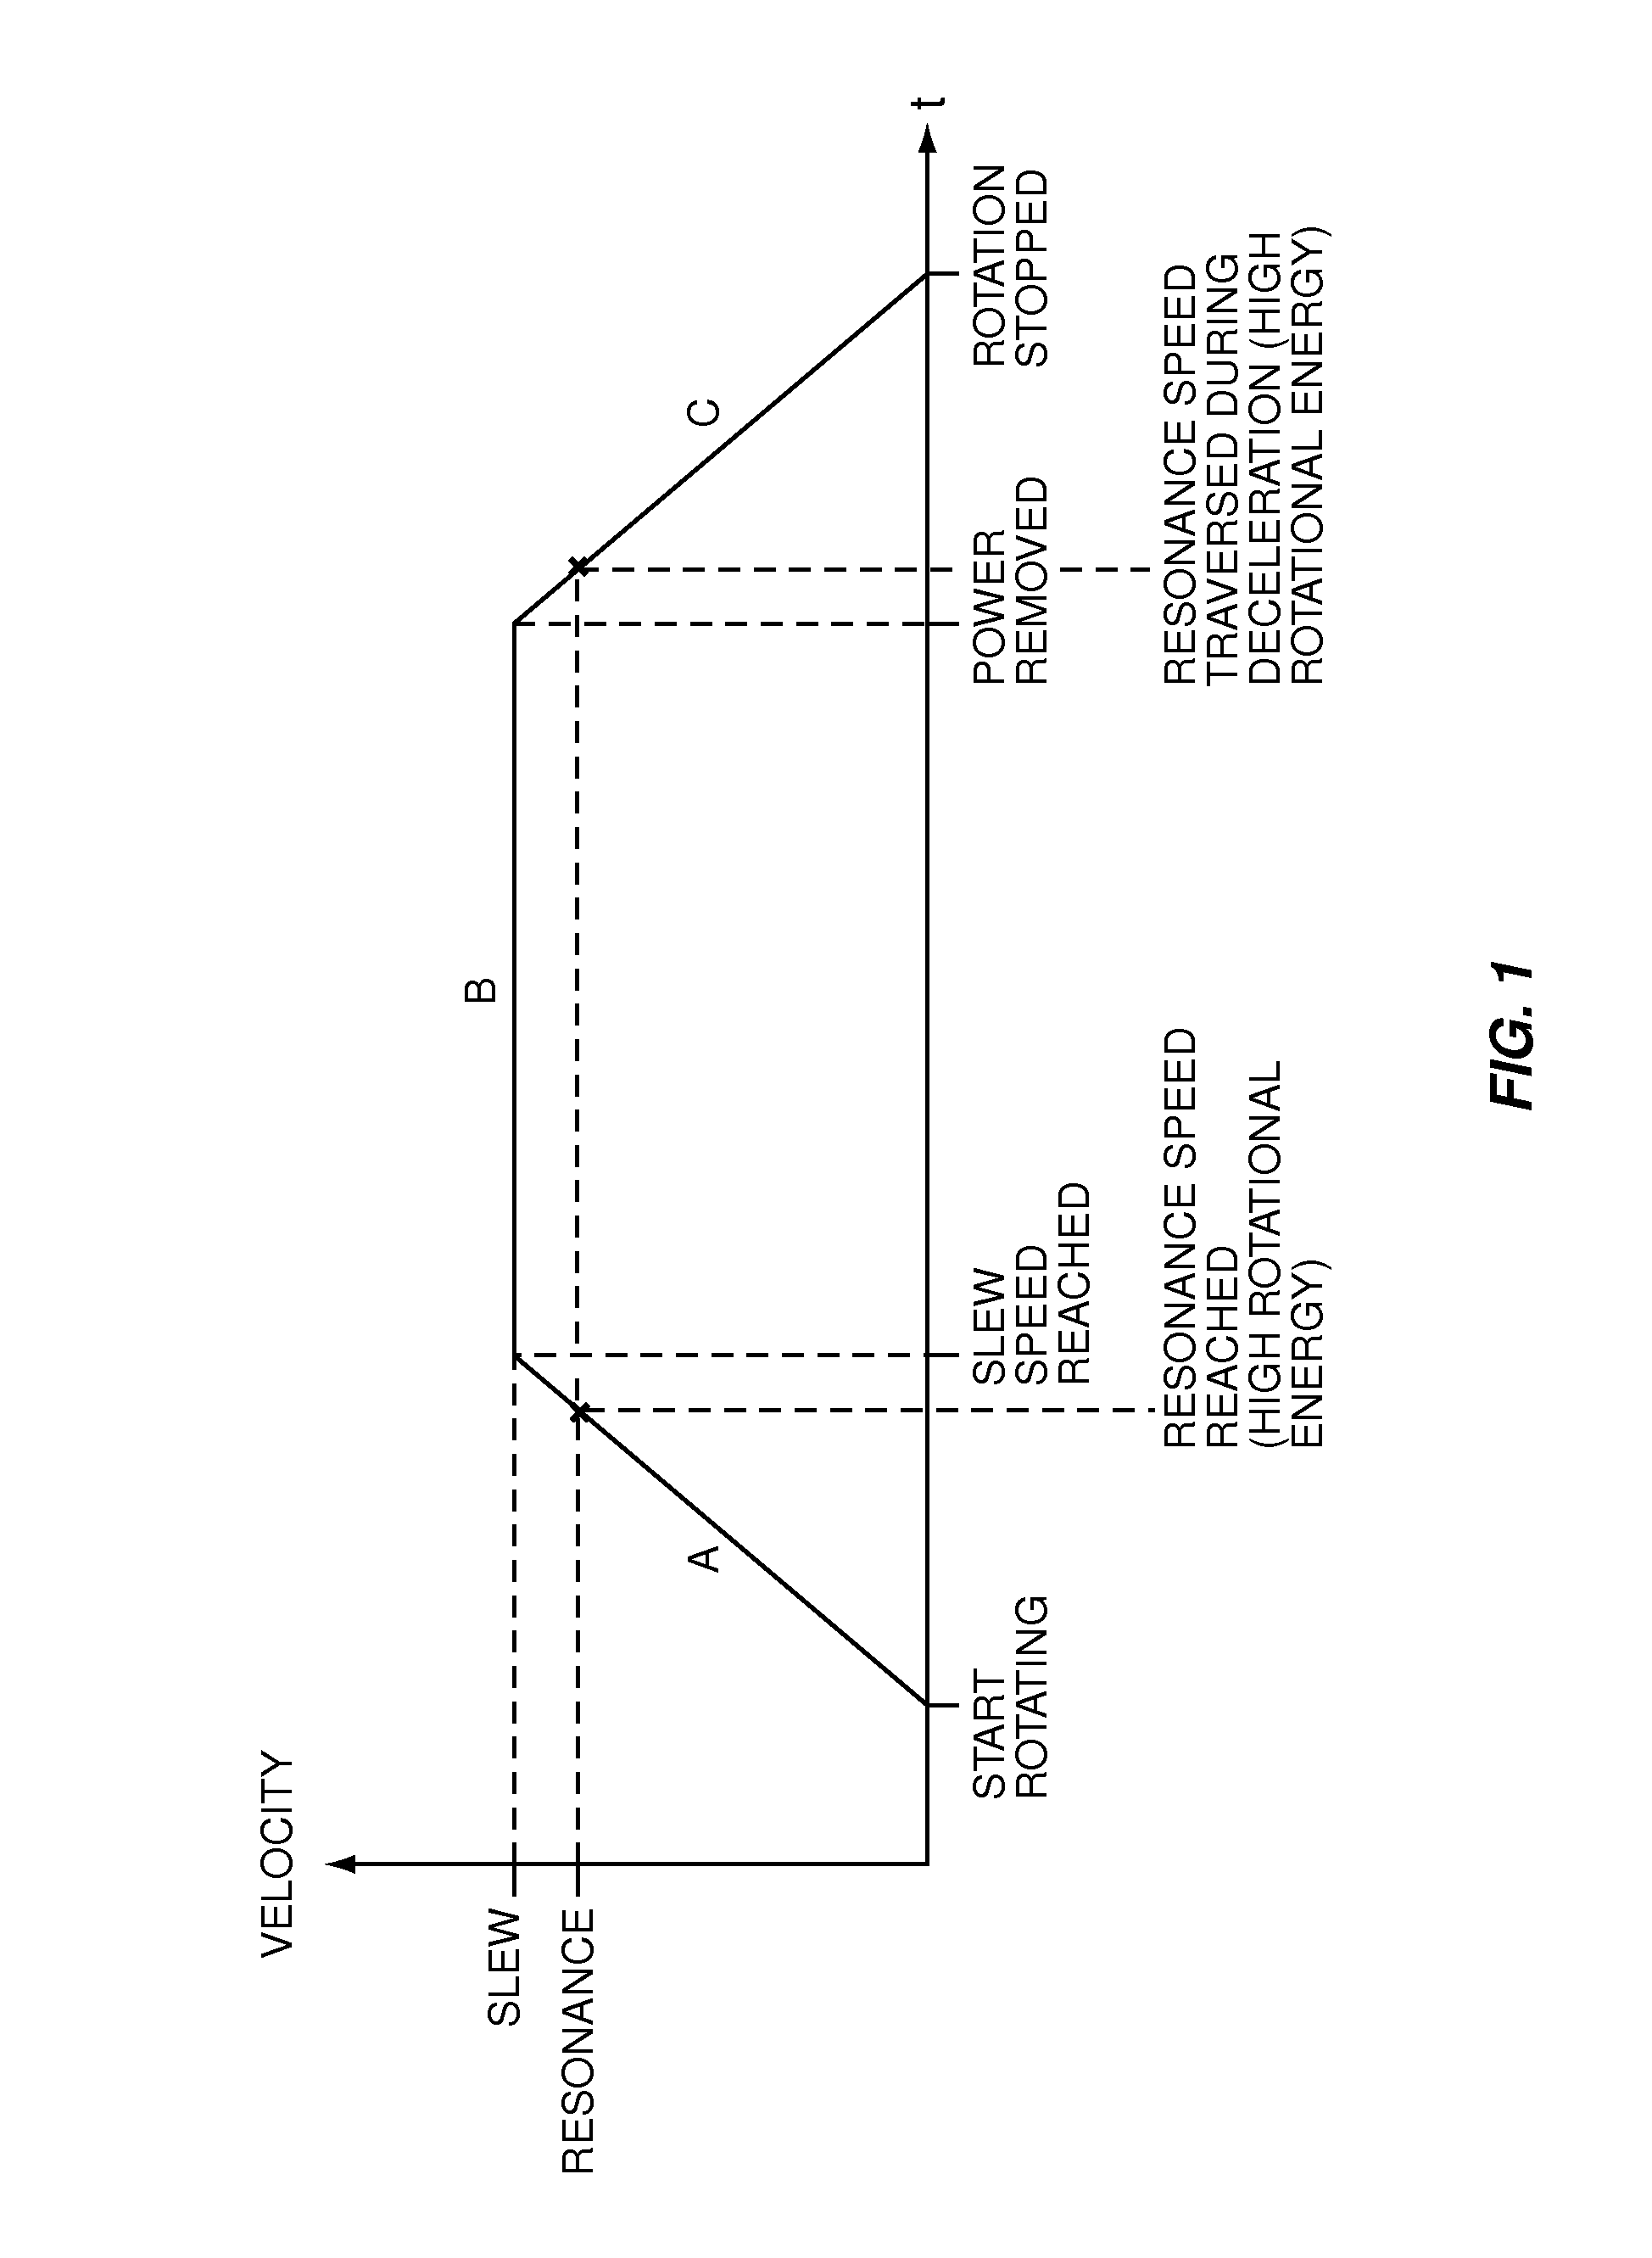 Automatic balancing device and system for centrifuge rotors